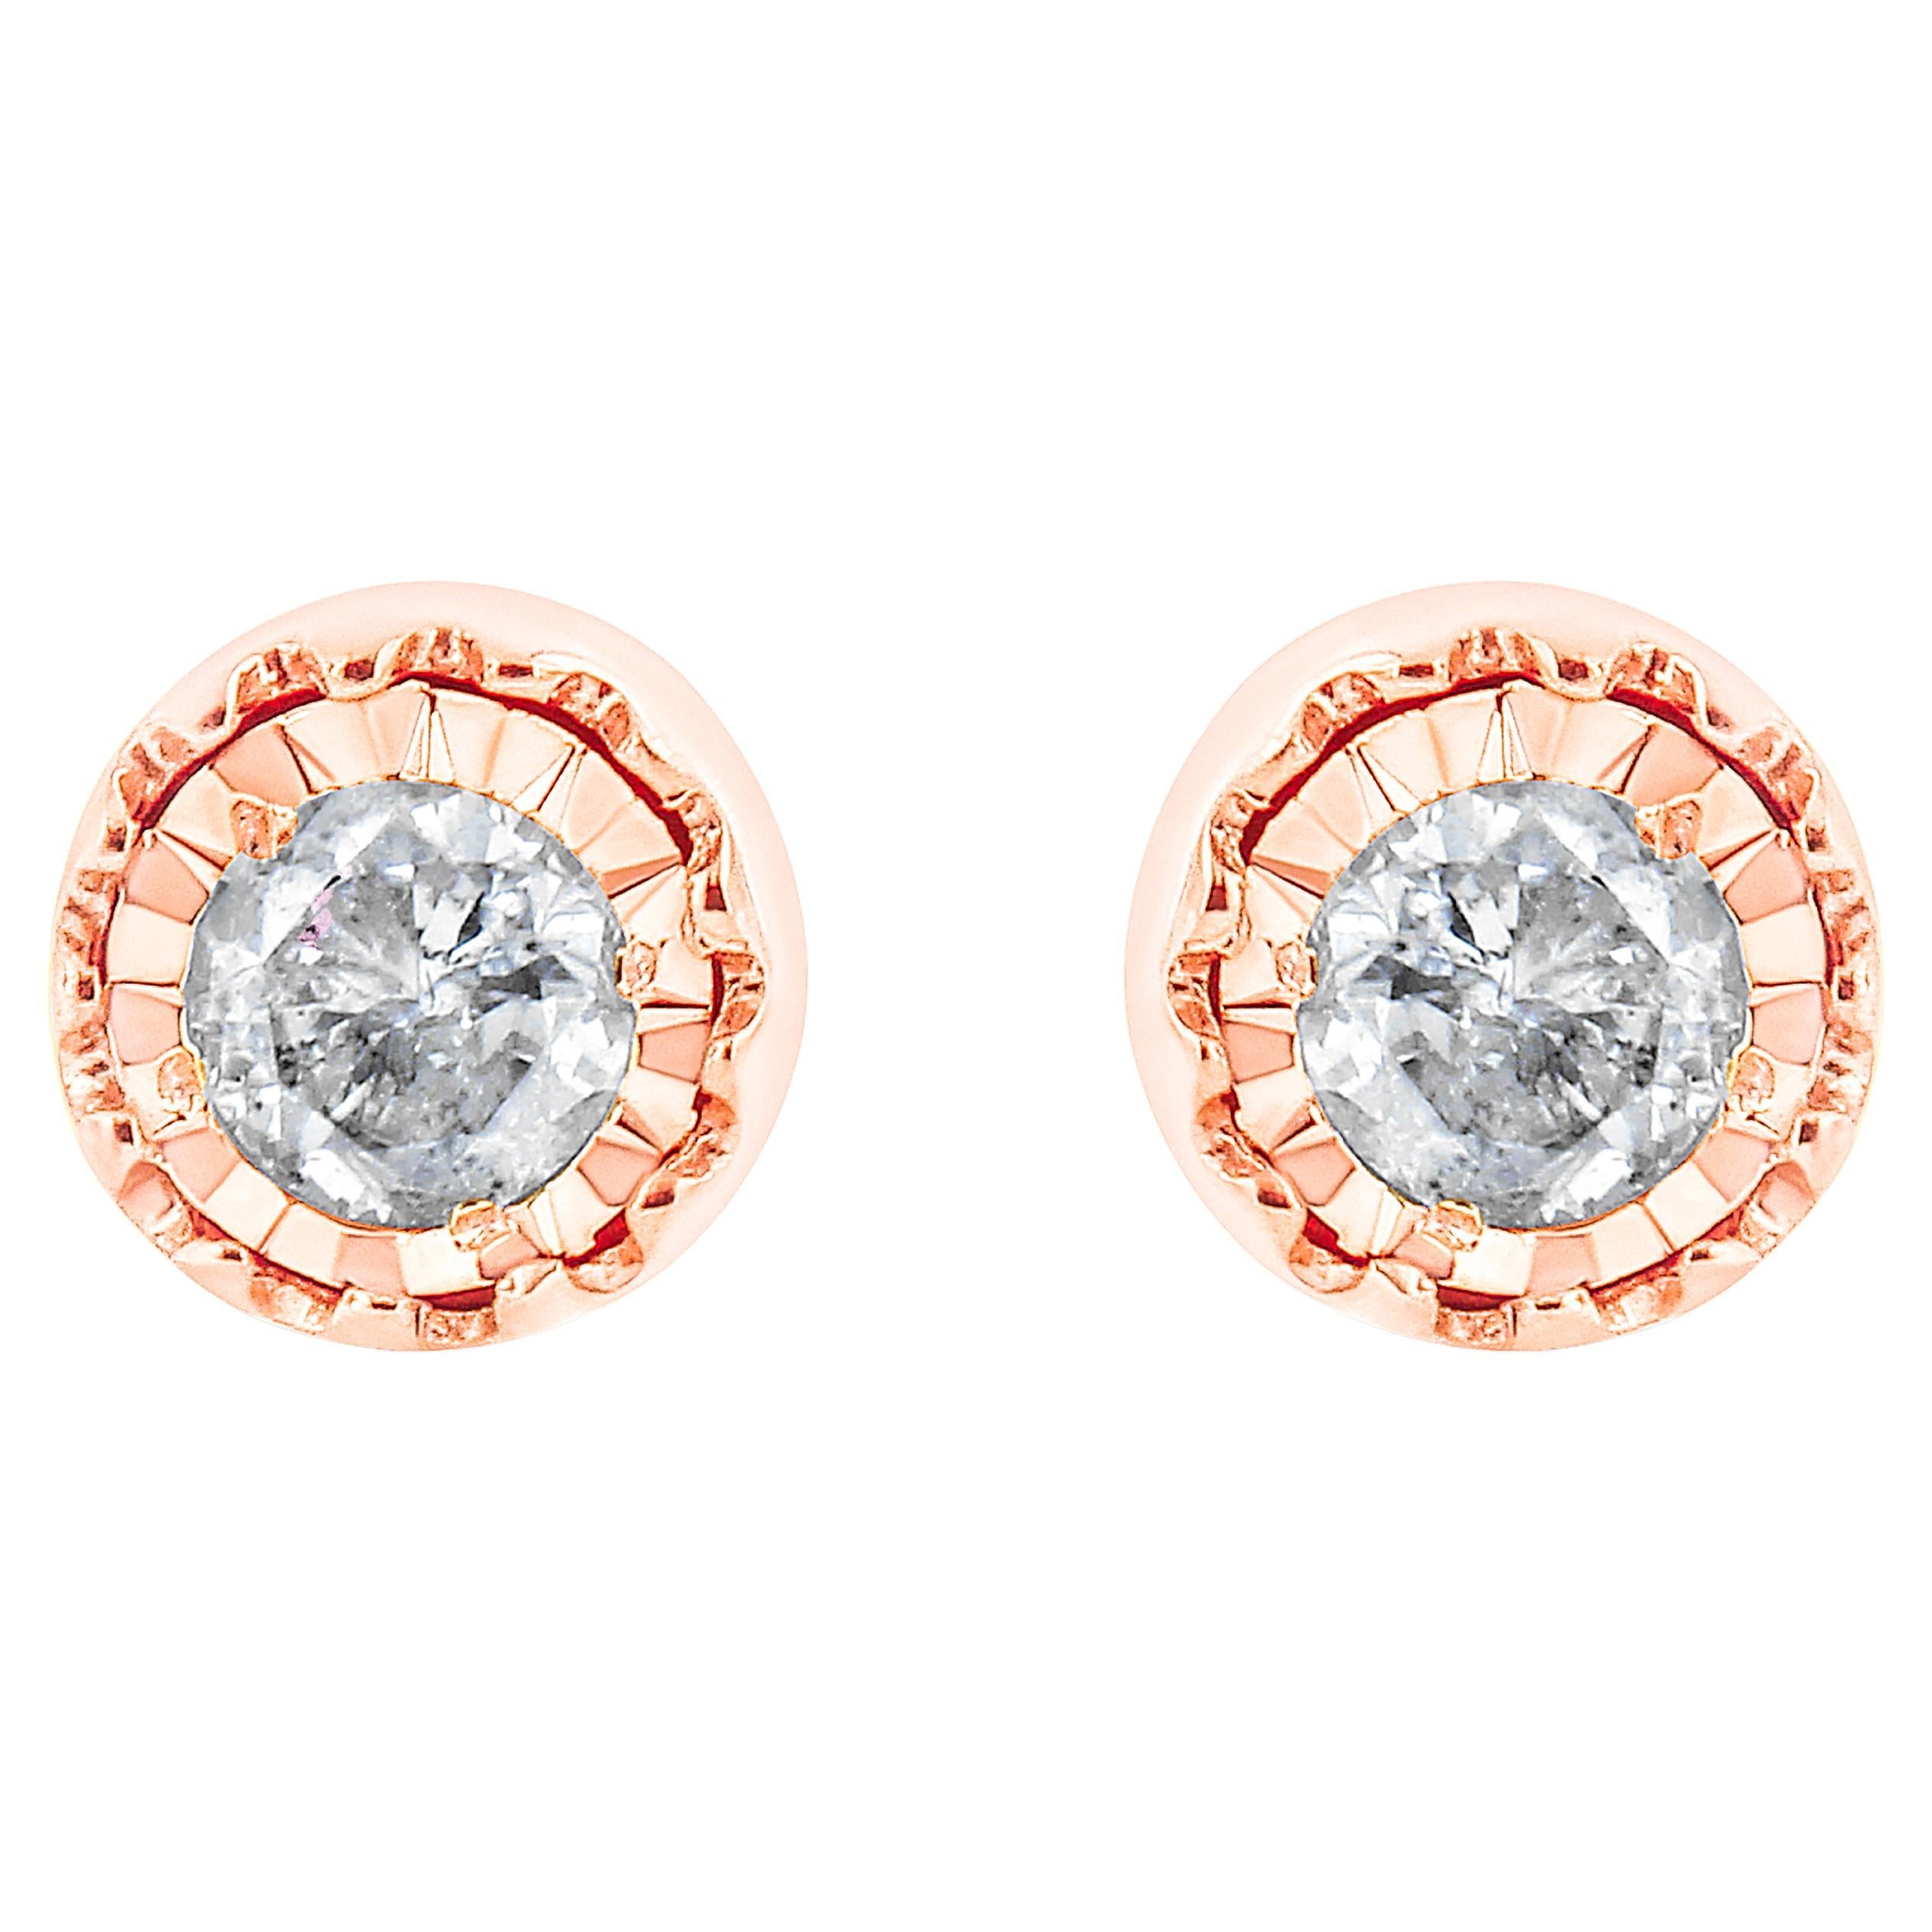 10K Rose Gold over Silver 3/8 Carat Diamond Miracle Set Stud Earrings For Sale